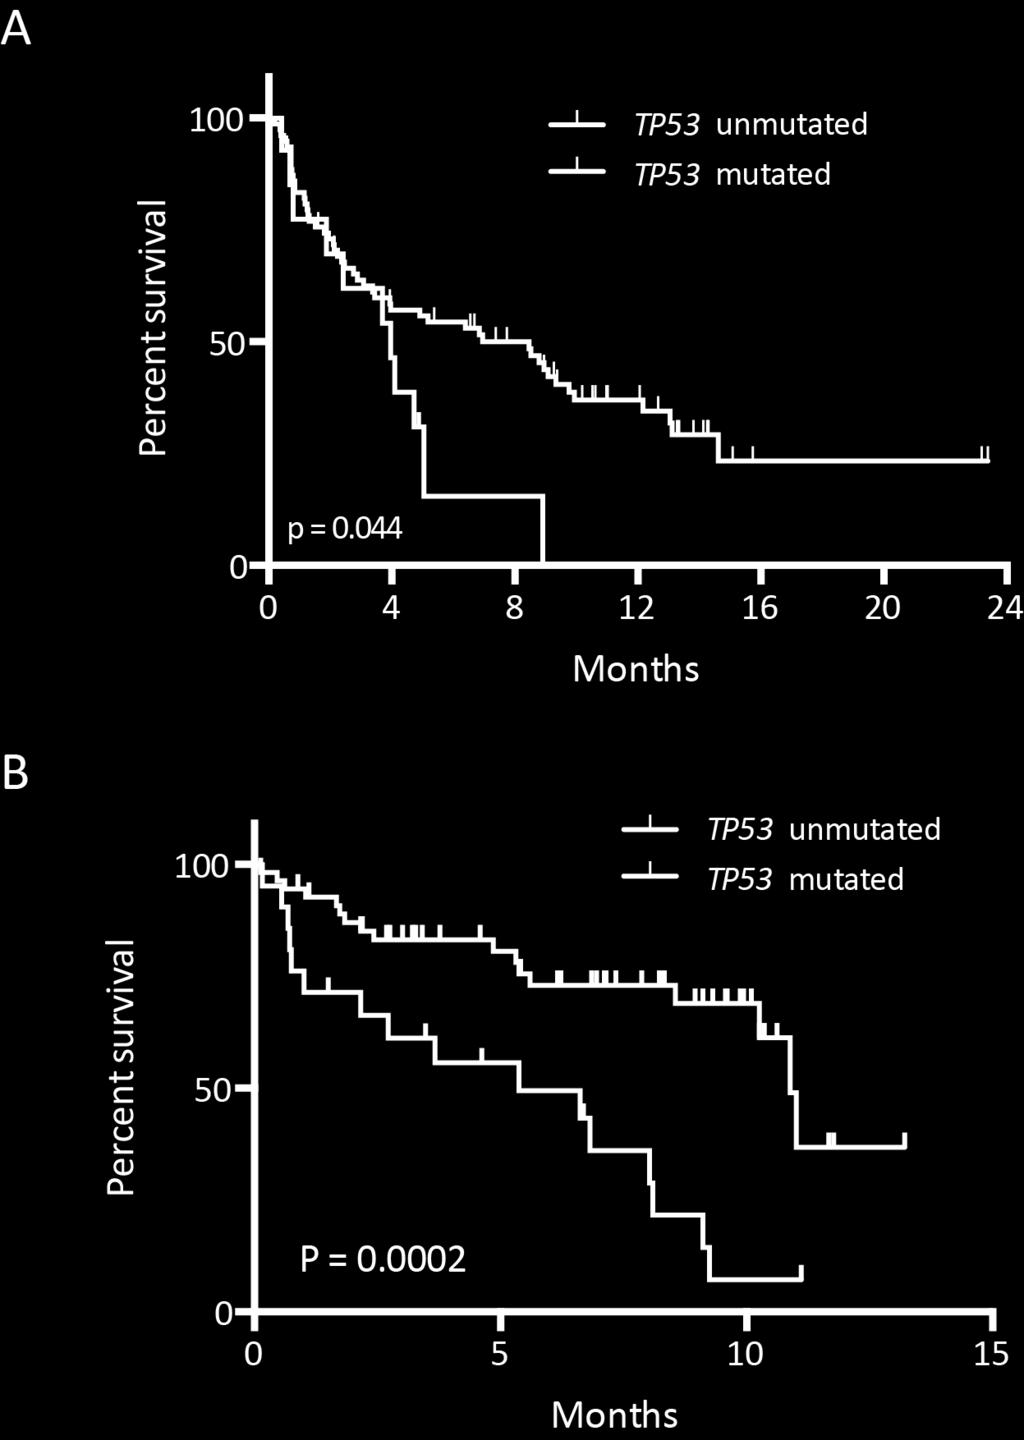 Supplementary Figure S5 - Overall survival in DFCI cohort according to TP53 mutation status.